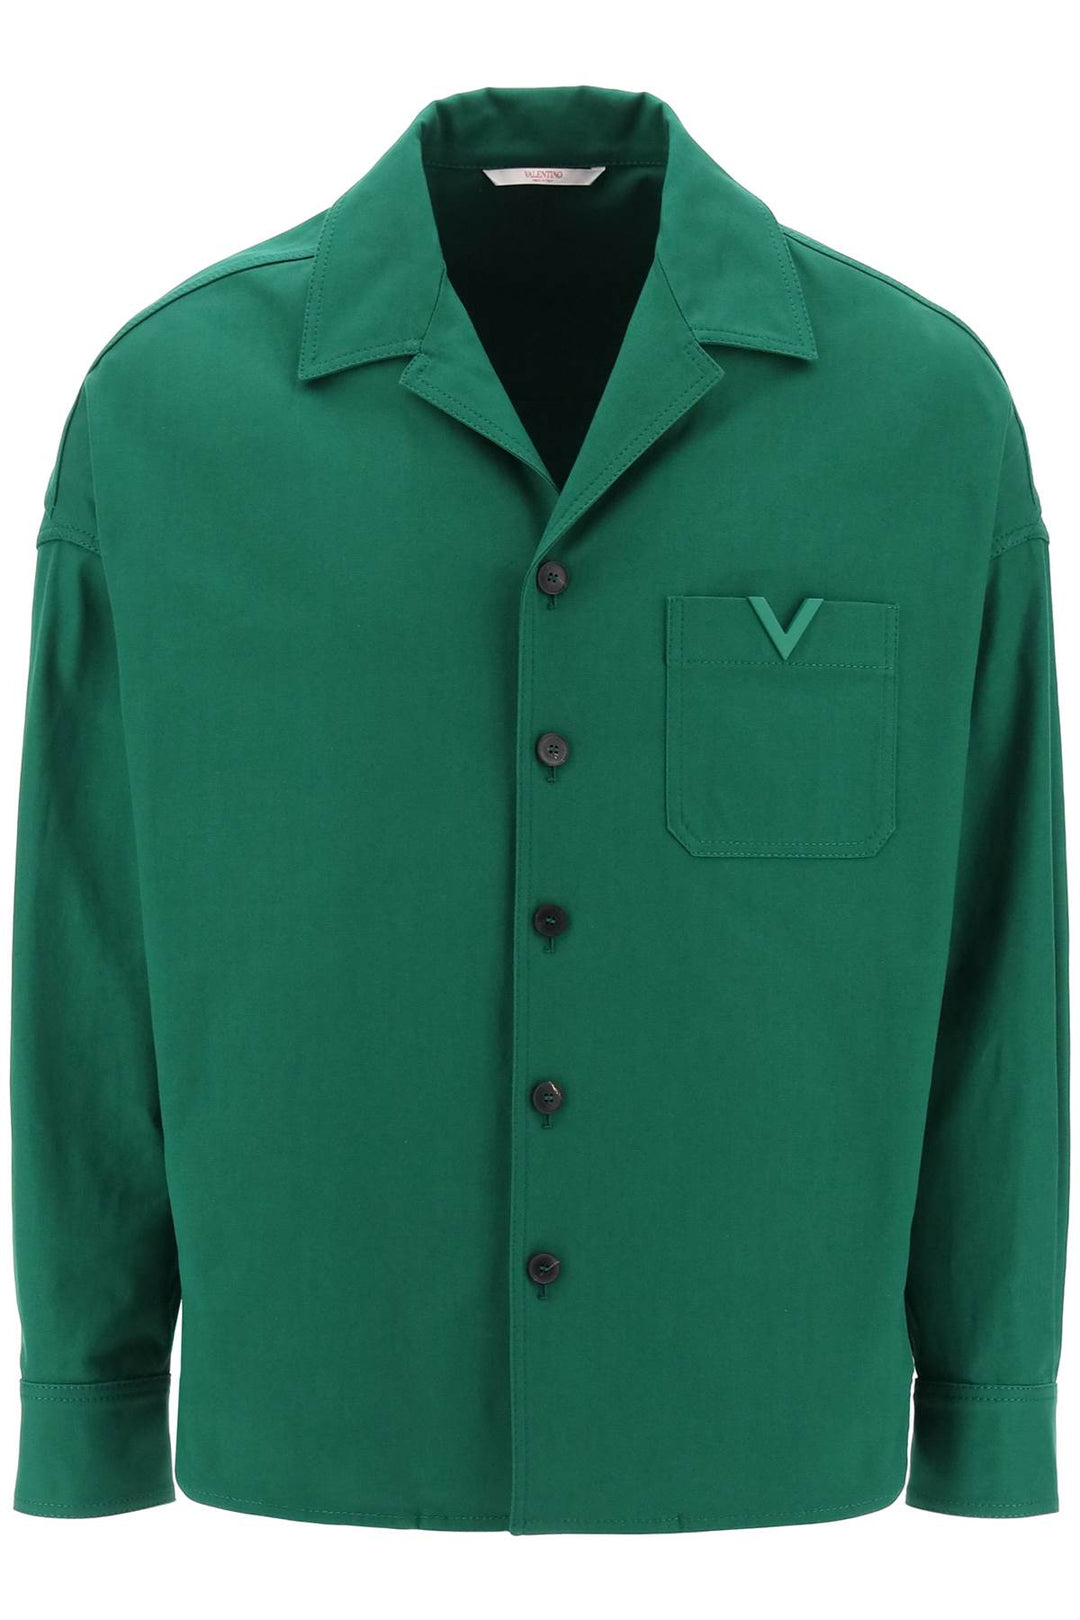 Valentino Garavani Replace With Double Quotecanvas Overshirt With V Detail   Verde